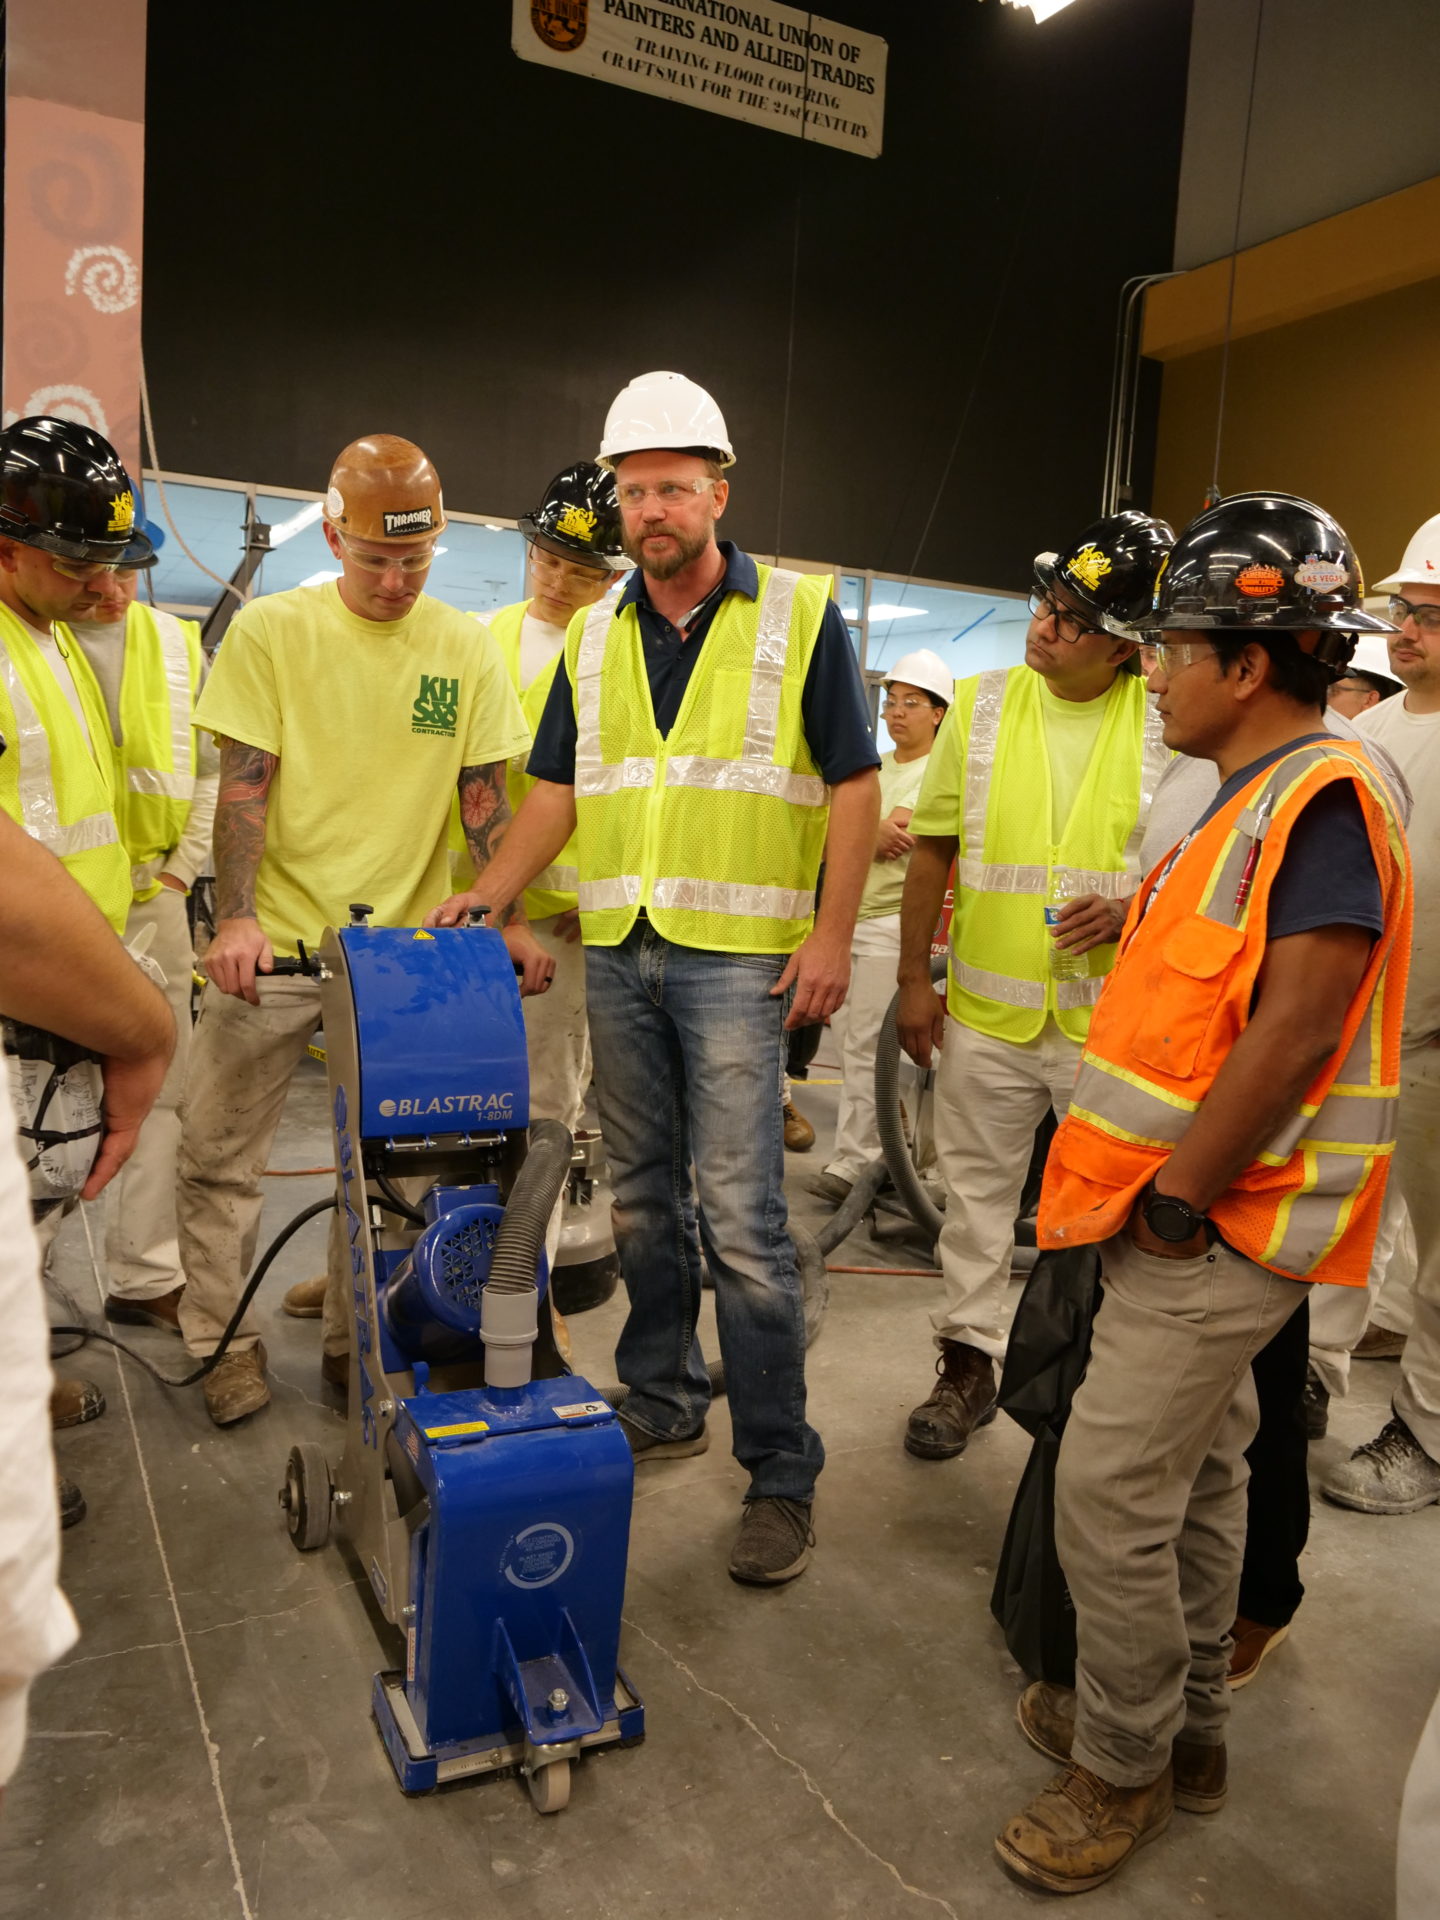 Image from the Gallery: Epoxy Training – Las Vegas, NV